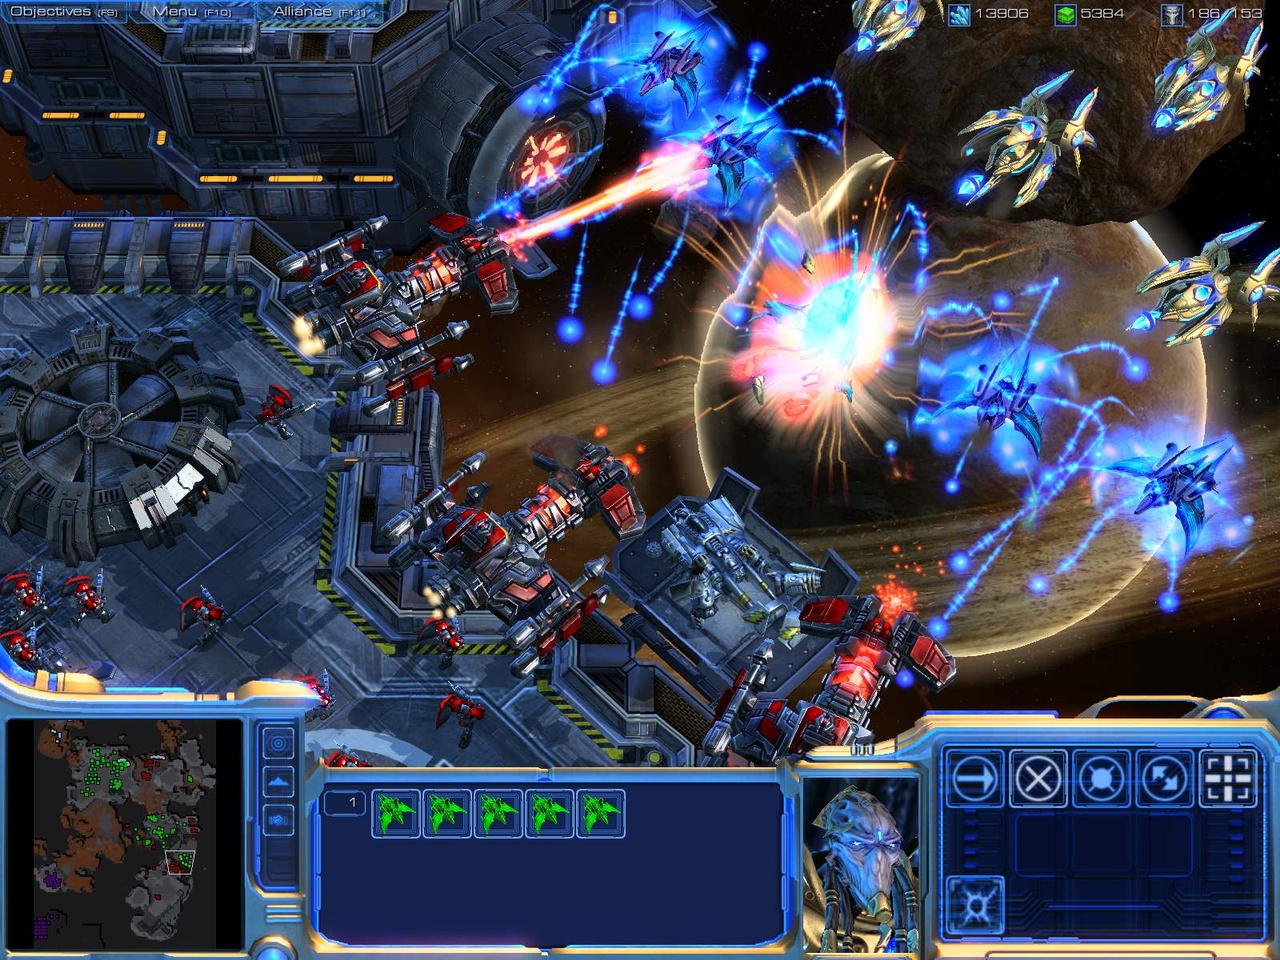 In case you hadn't heard, one of the most loved real-time strategy games in history is back.